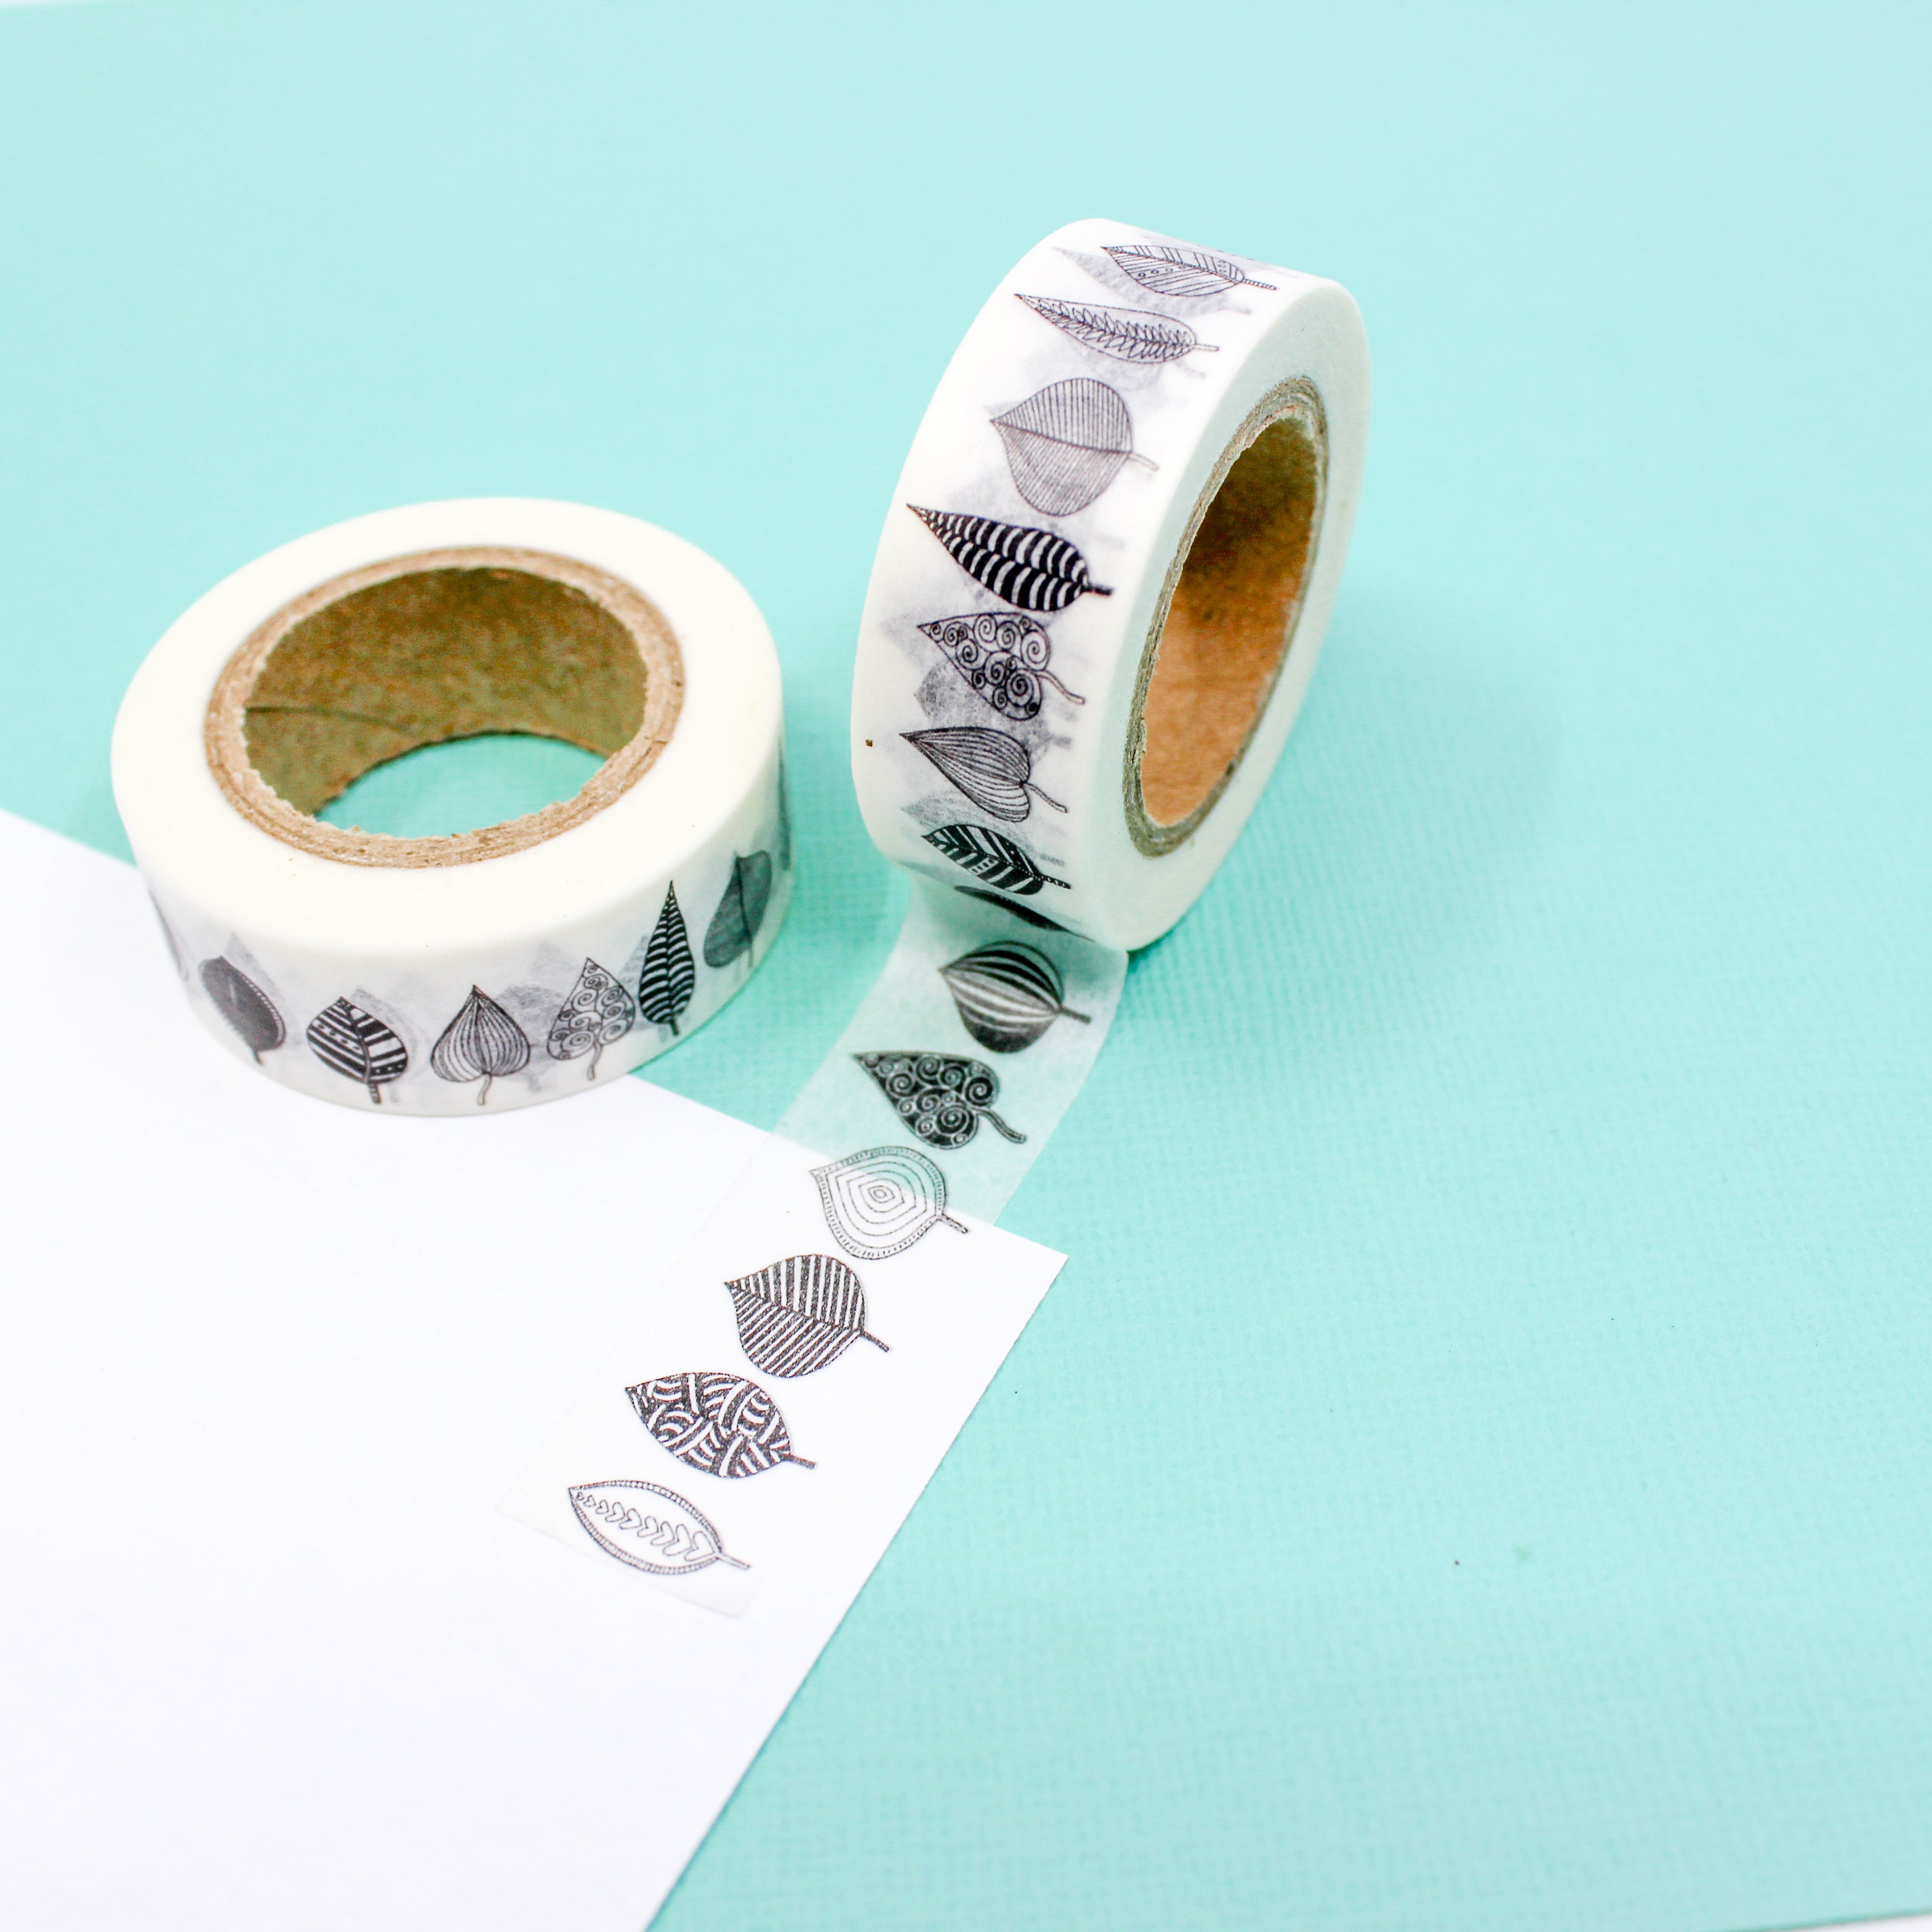 This is a black and white autumn leaf pattern washi tape from BBB Supplies Craft Shop